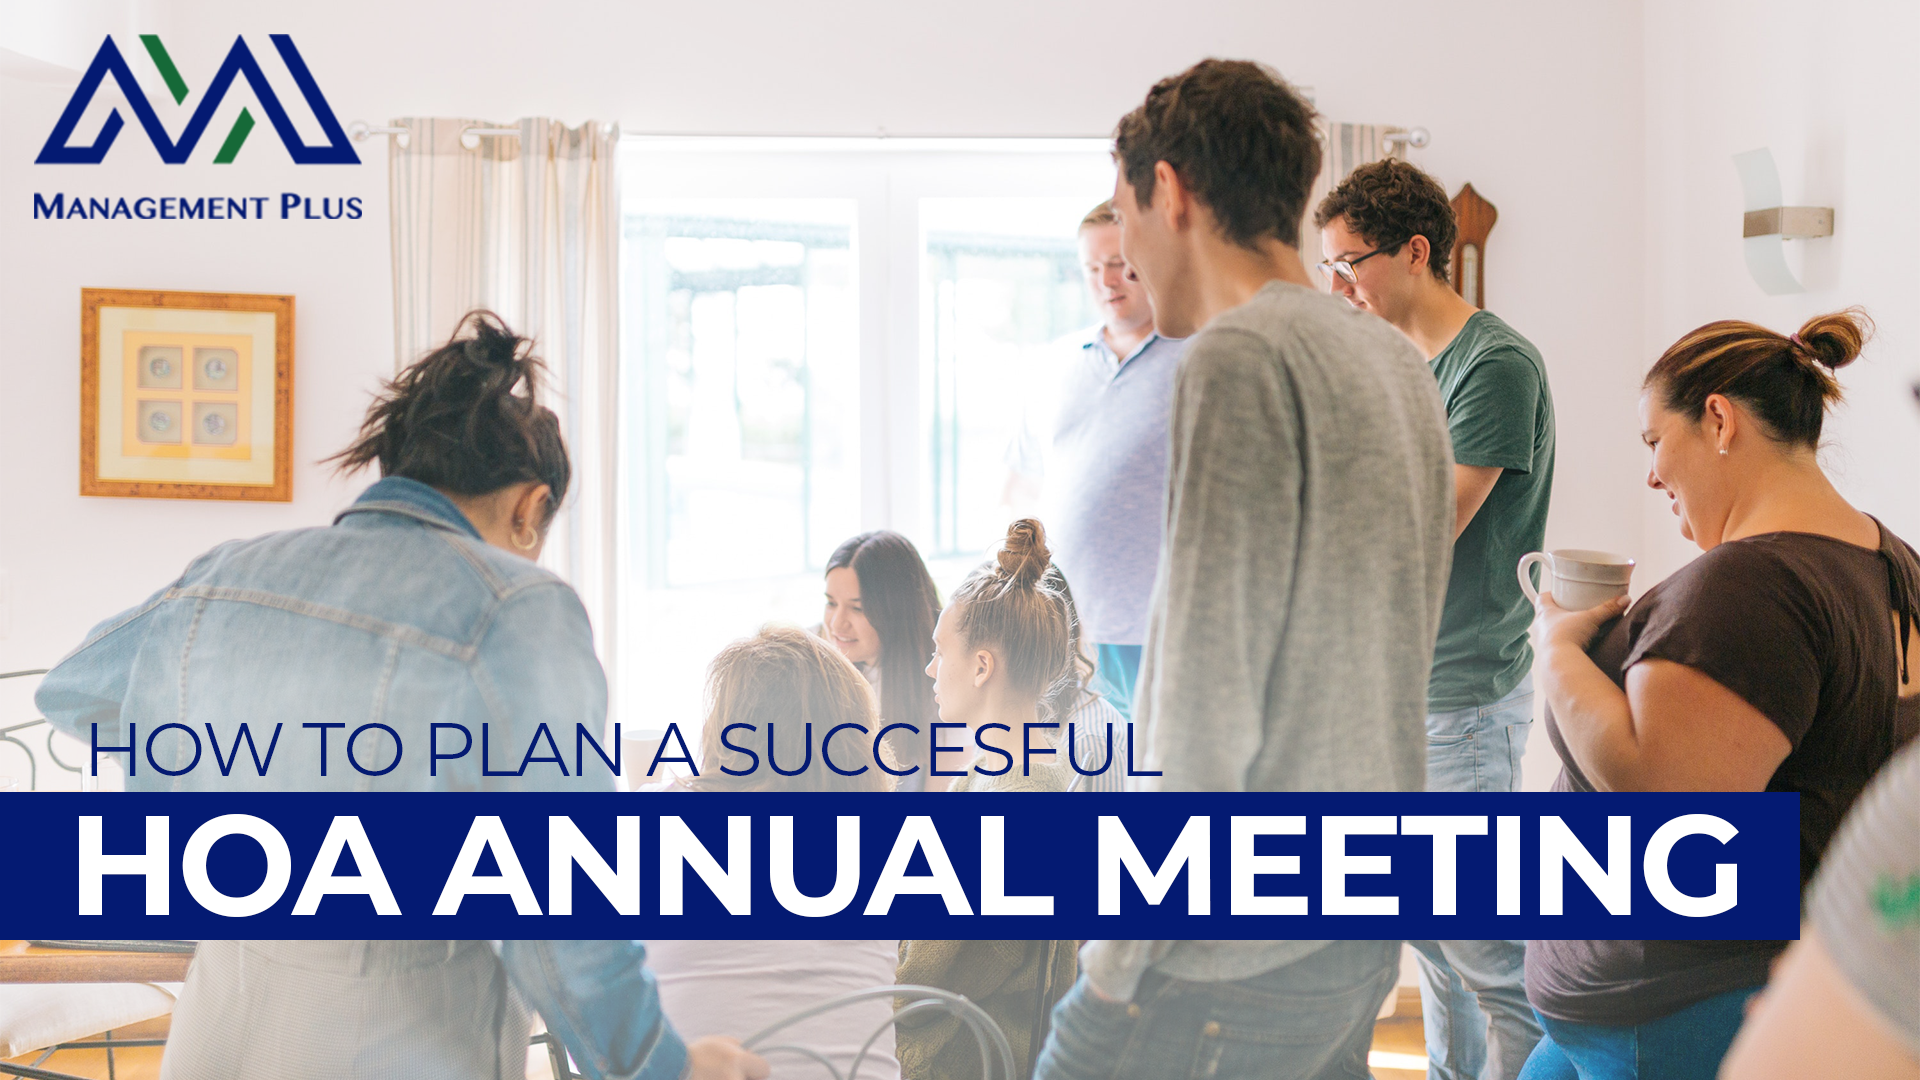 People gathered around having a discussion. The text reads, "How to Plan a Successful HOA Annual Meeting"